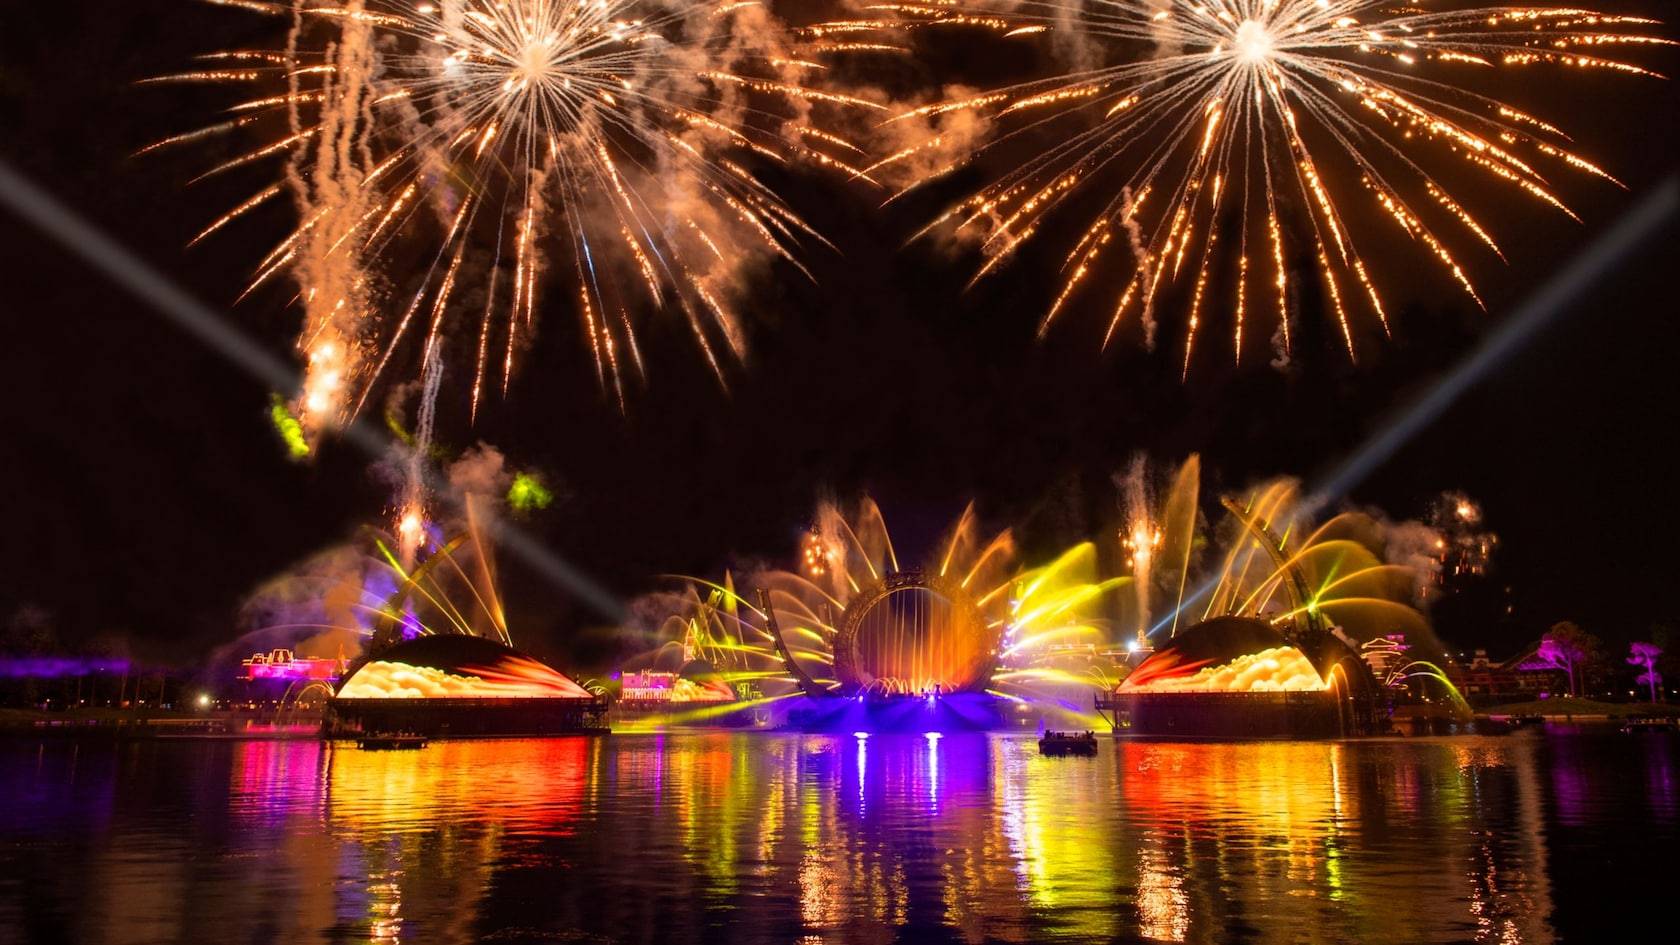 New behind-the-scenes video shows more of Harmonious coming to EPCOT October 1